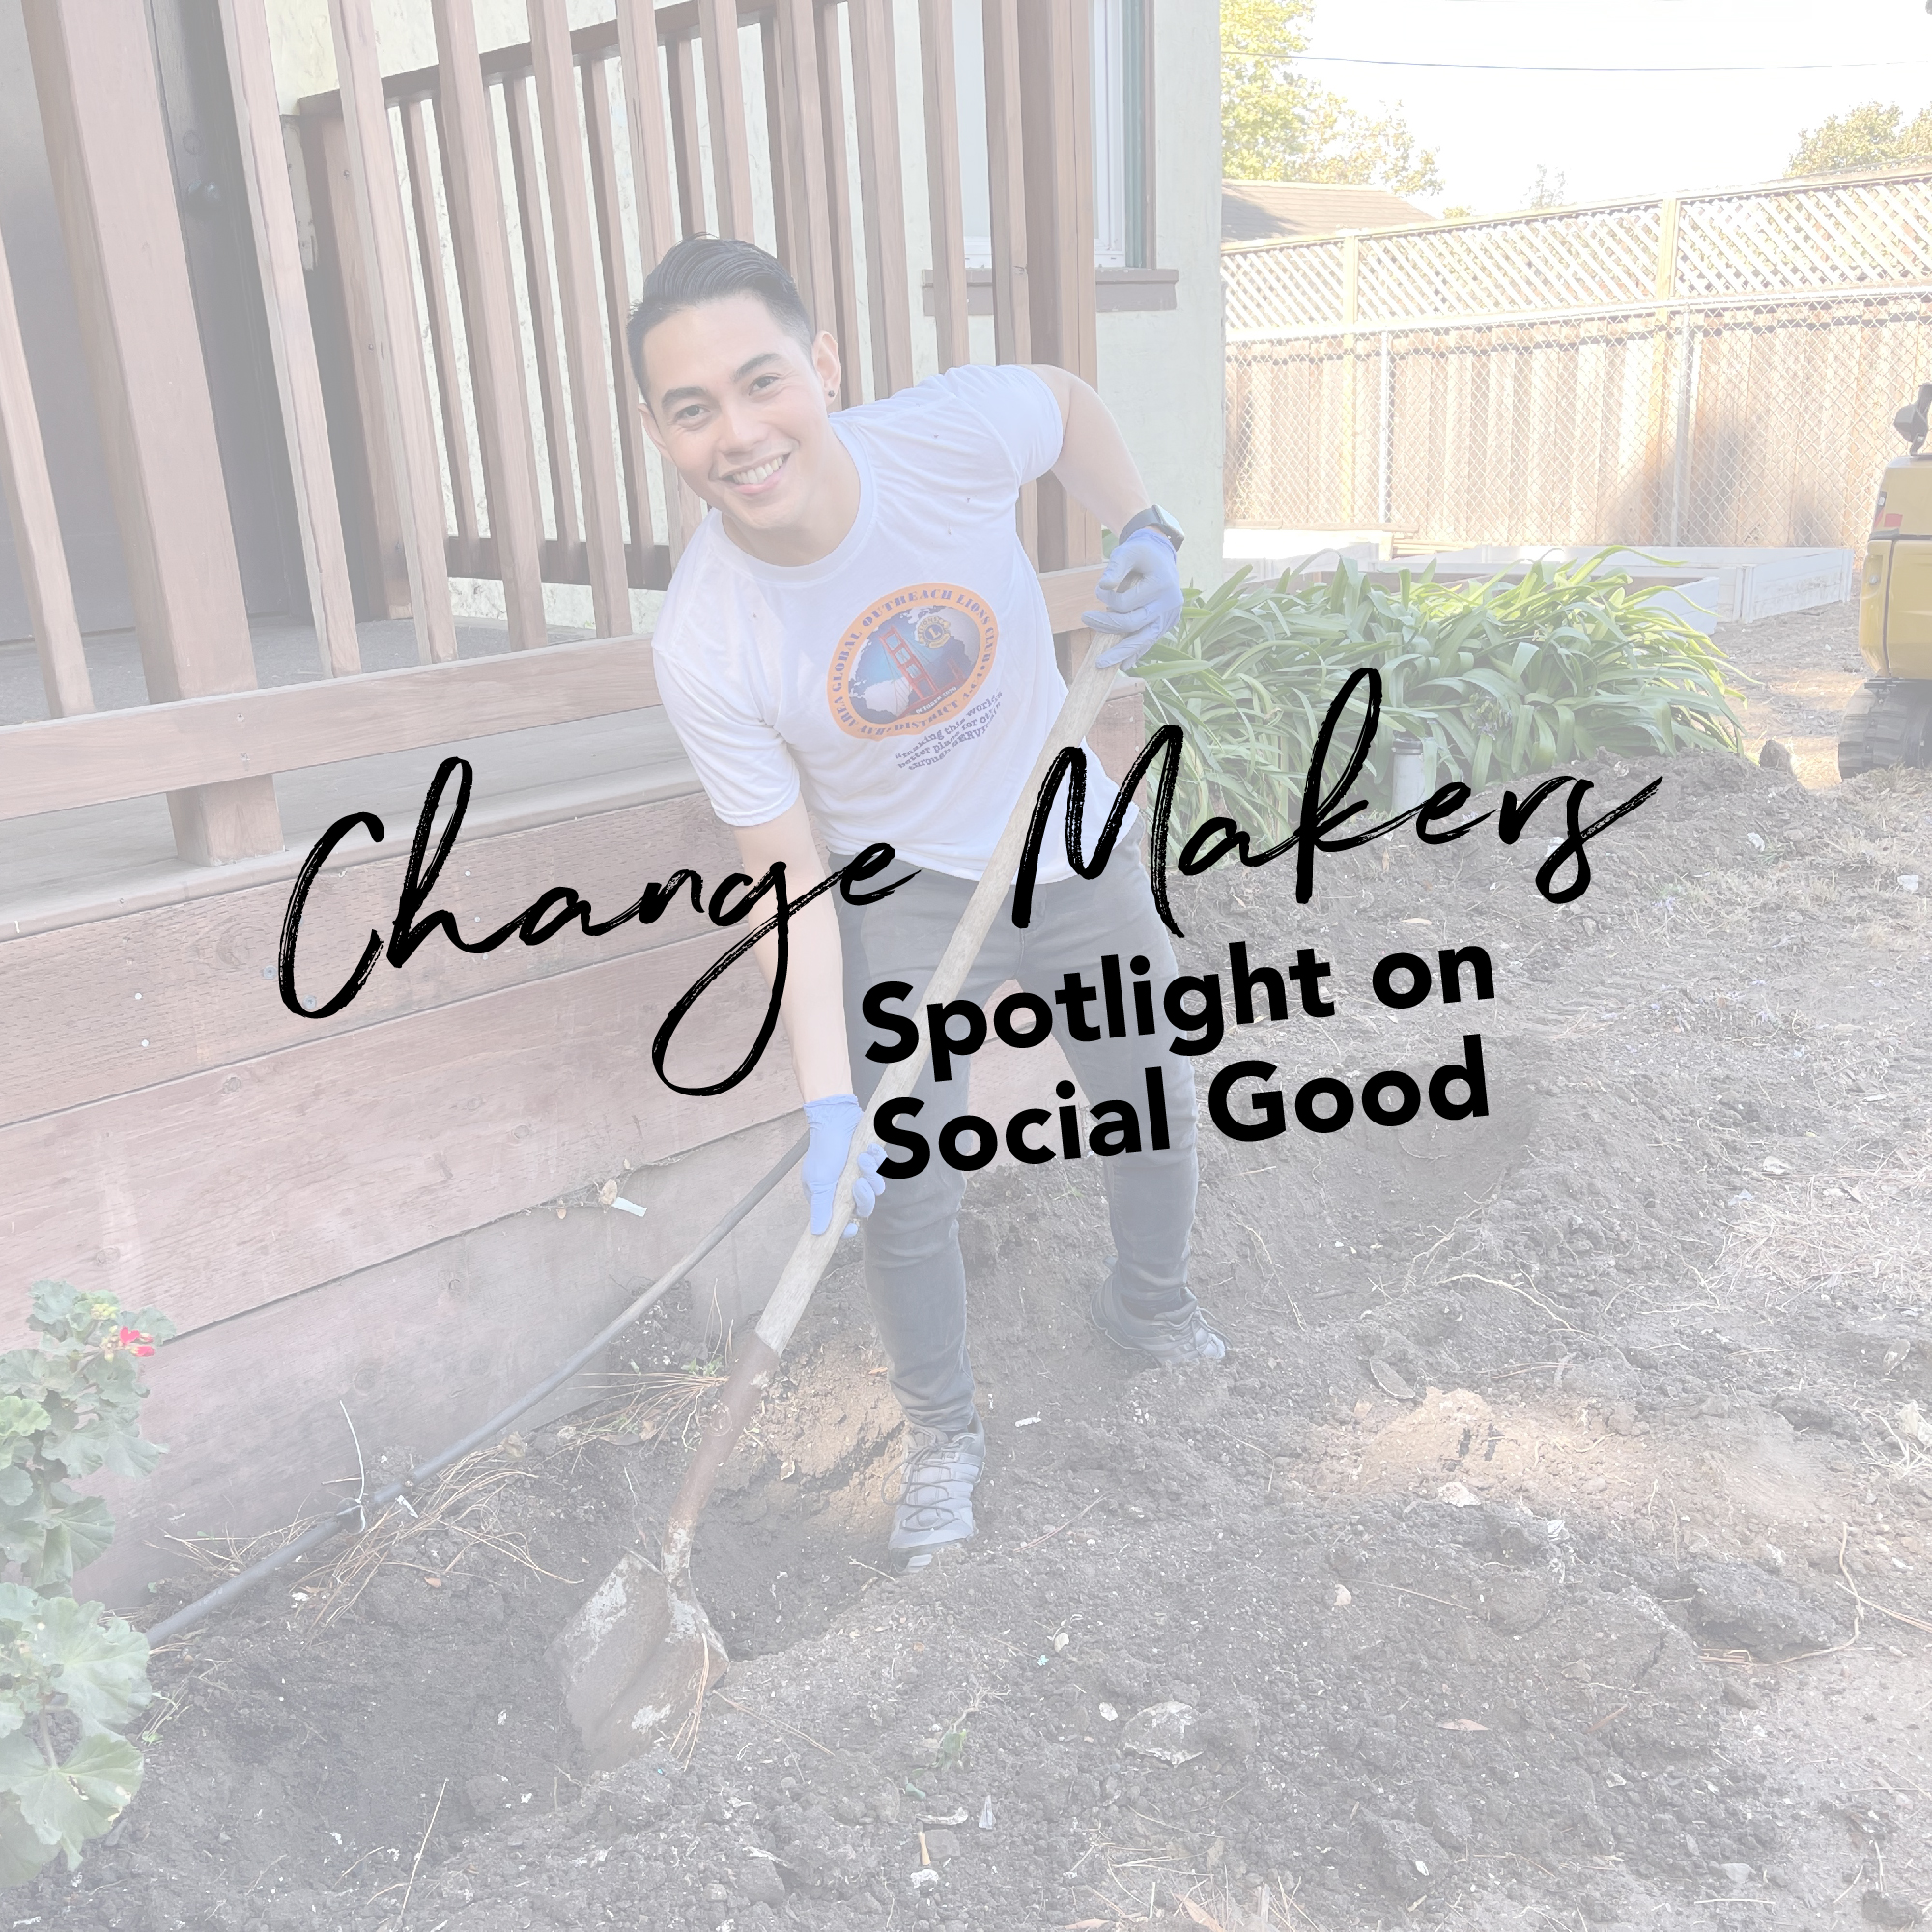 young man holding a shovel and gardening with the text change makers spolight on social good on top